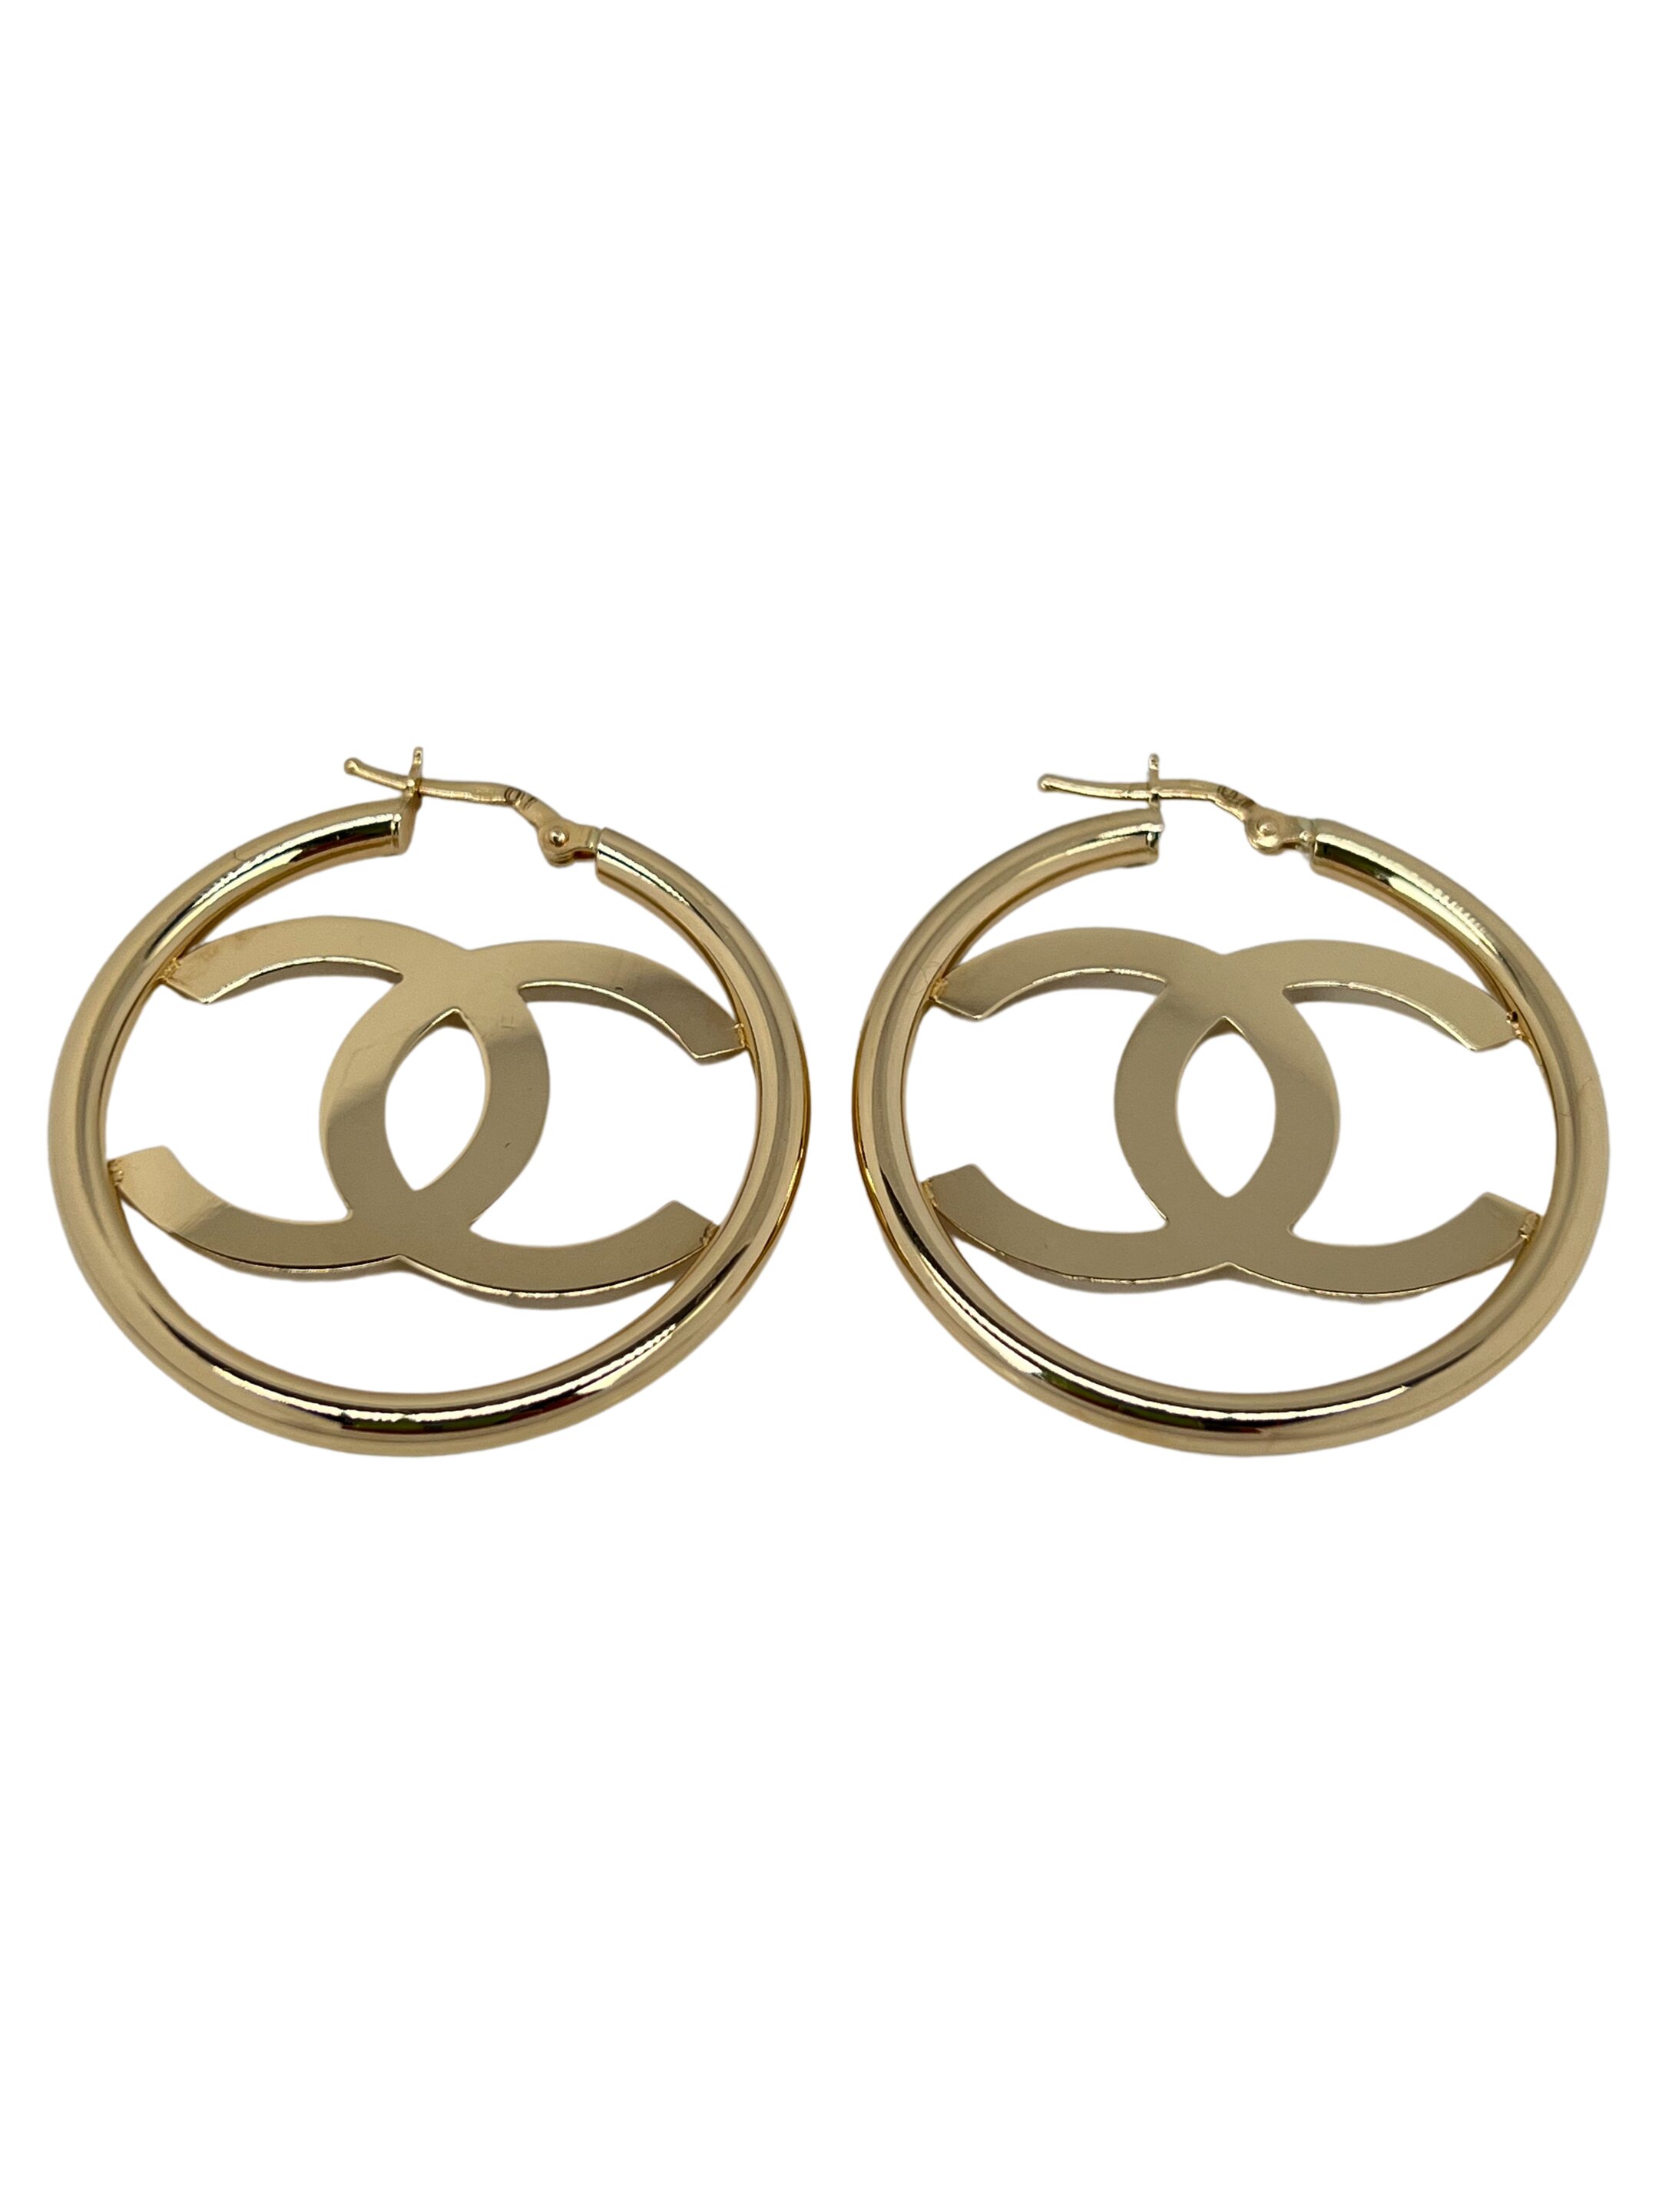 Gold hoop earrings with the letters CC Ø 50mm